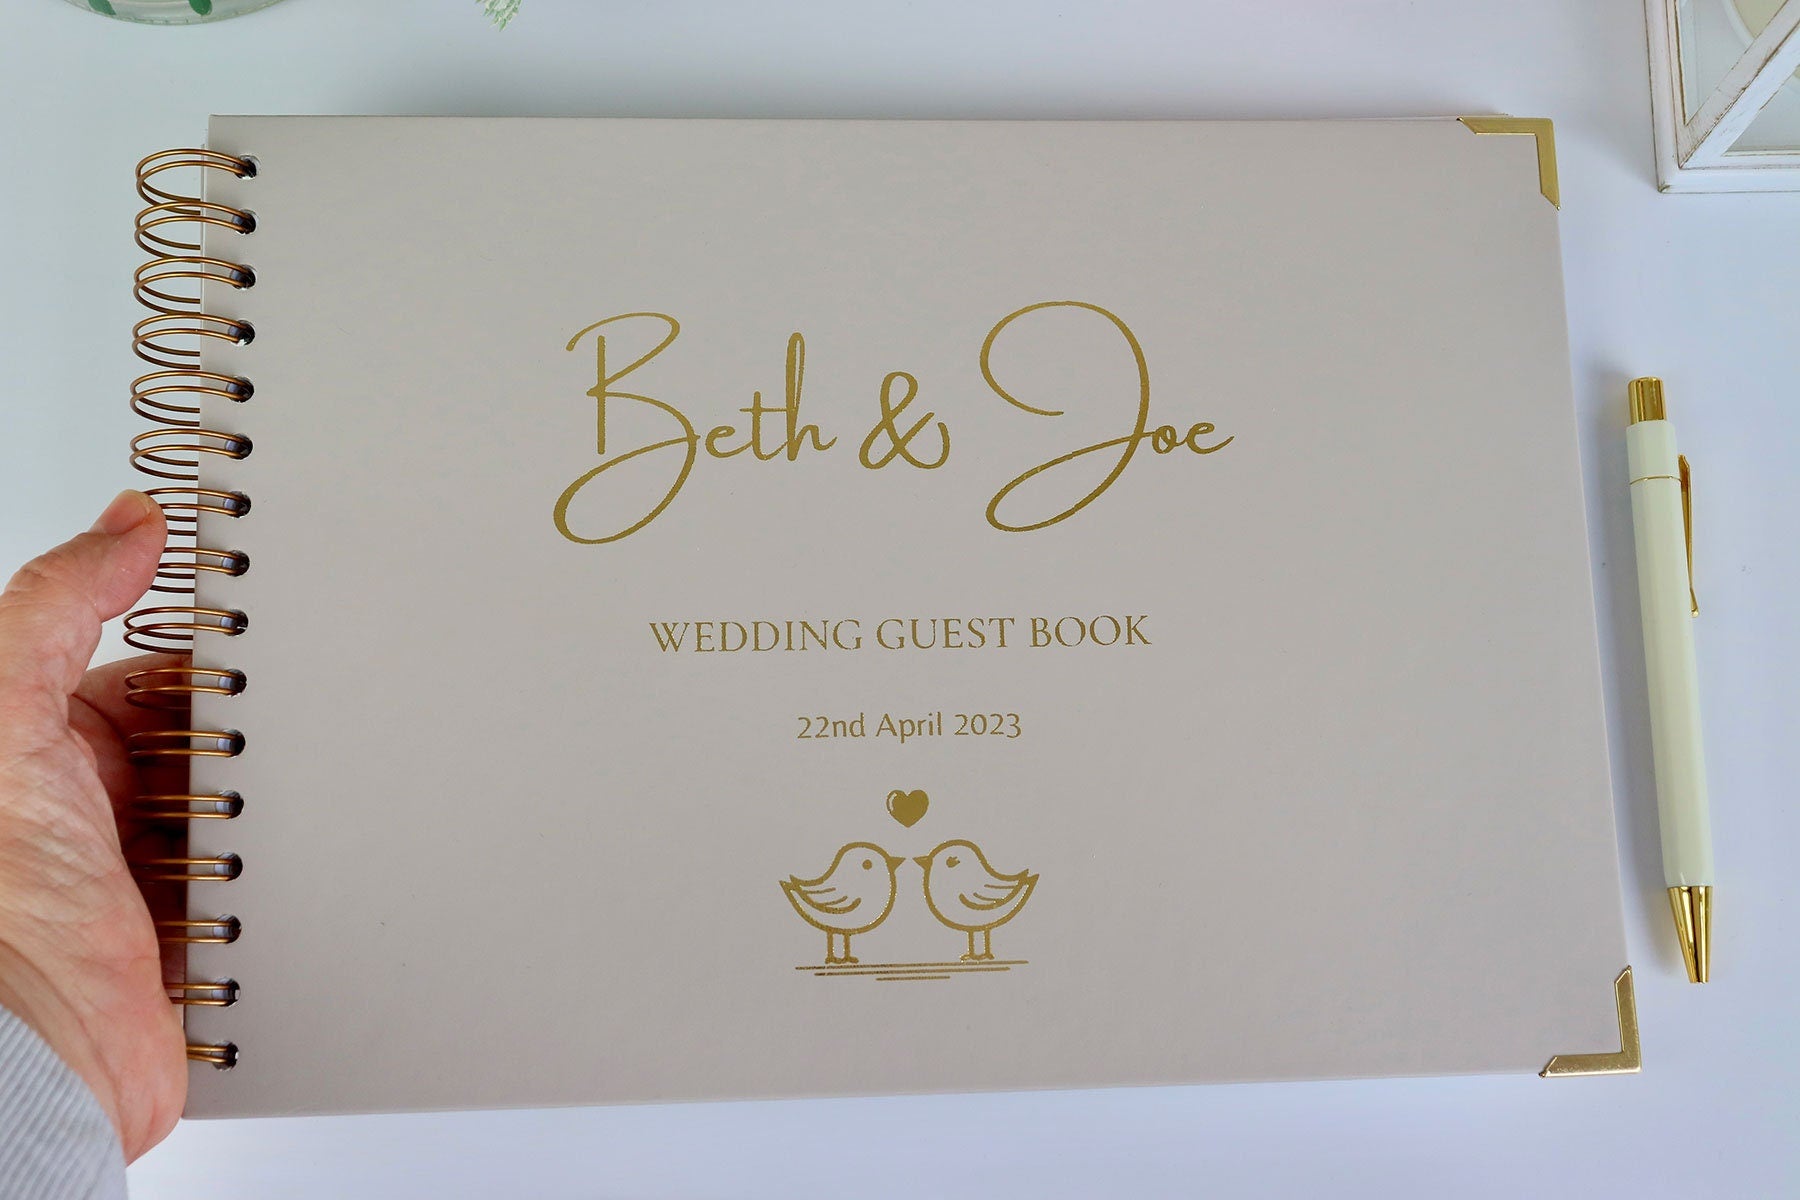 An A4 memory book in stone that says 'Beth and Joe' with 'wedding Guest Book' a date underneath and an image of two love birds kissing all in gold foil